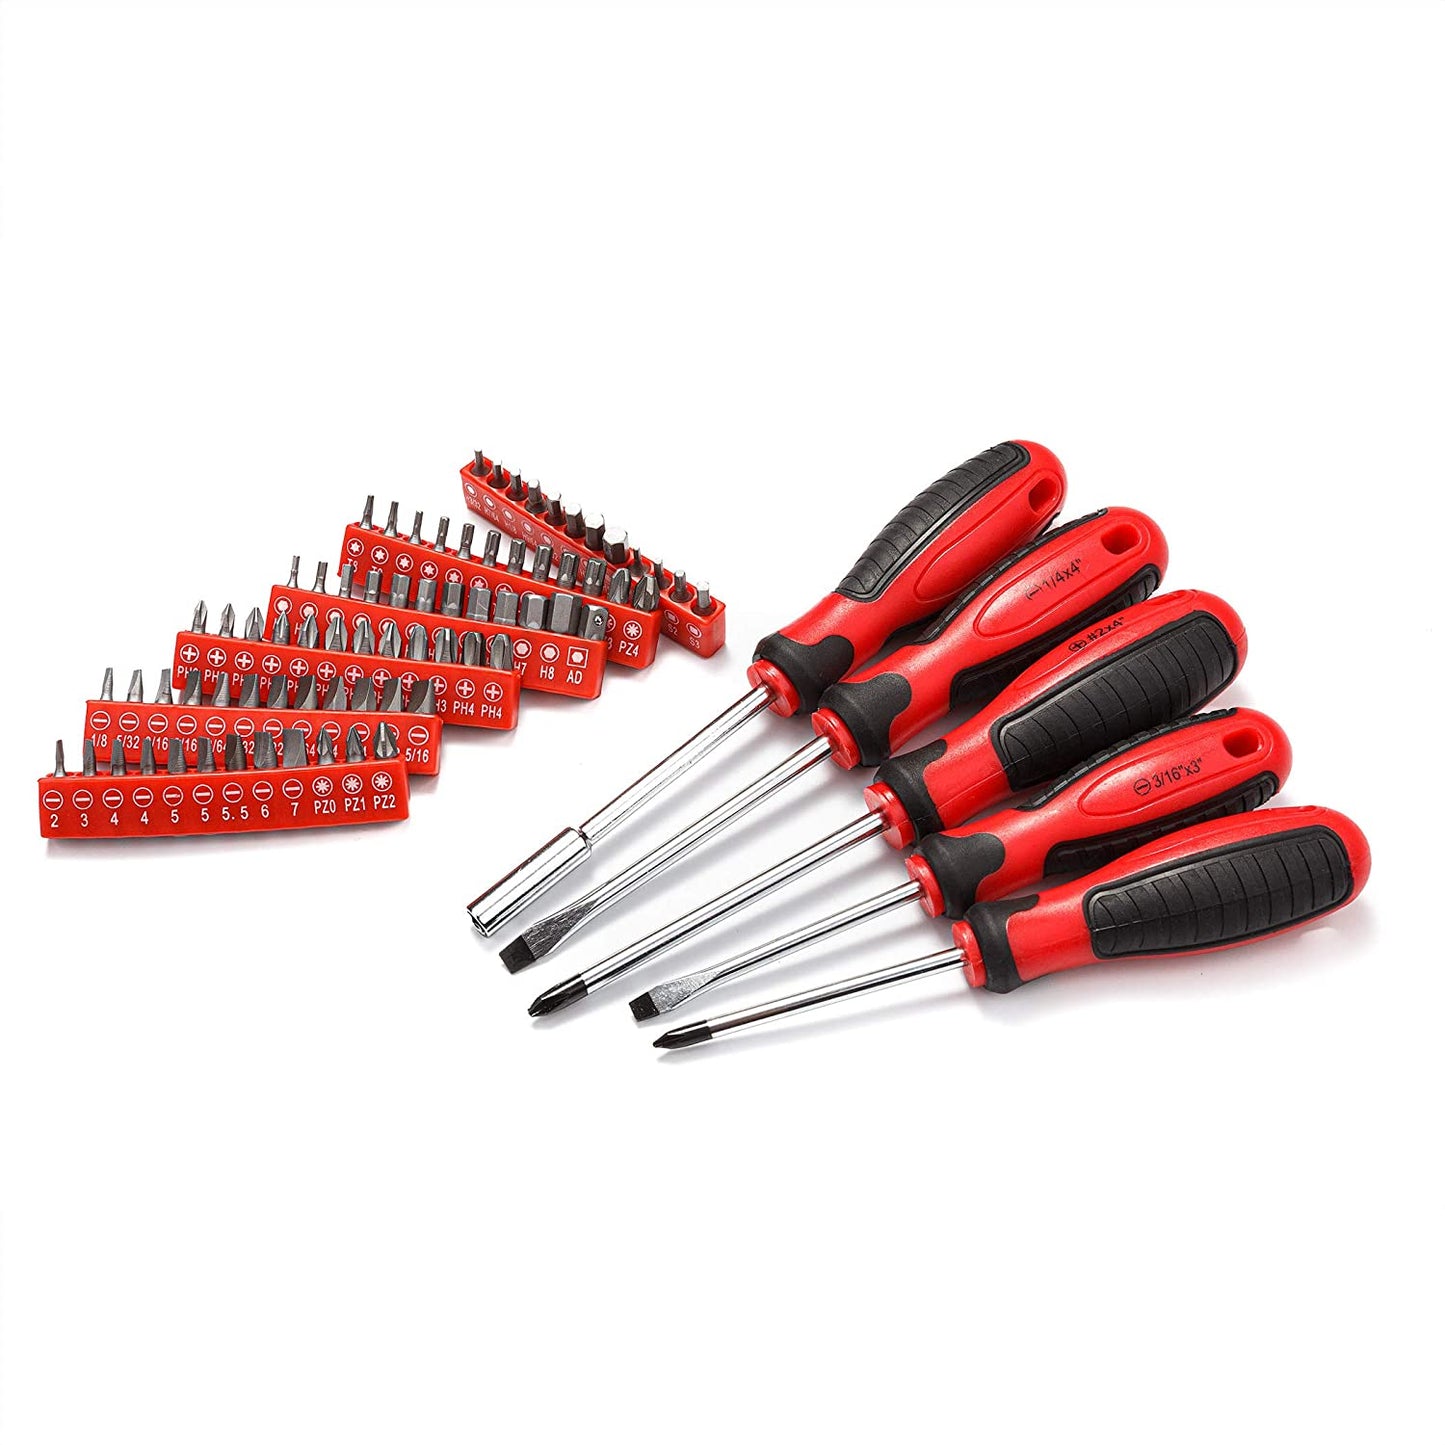 Cartman Tool Set 205Pcs Red Ratchet Wrench with Sockets Kit Set in Plastic Toolbox